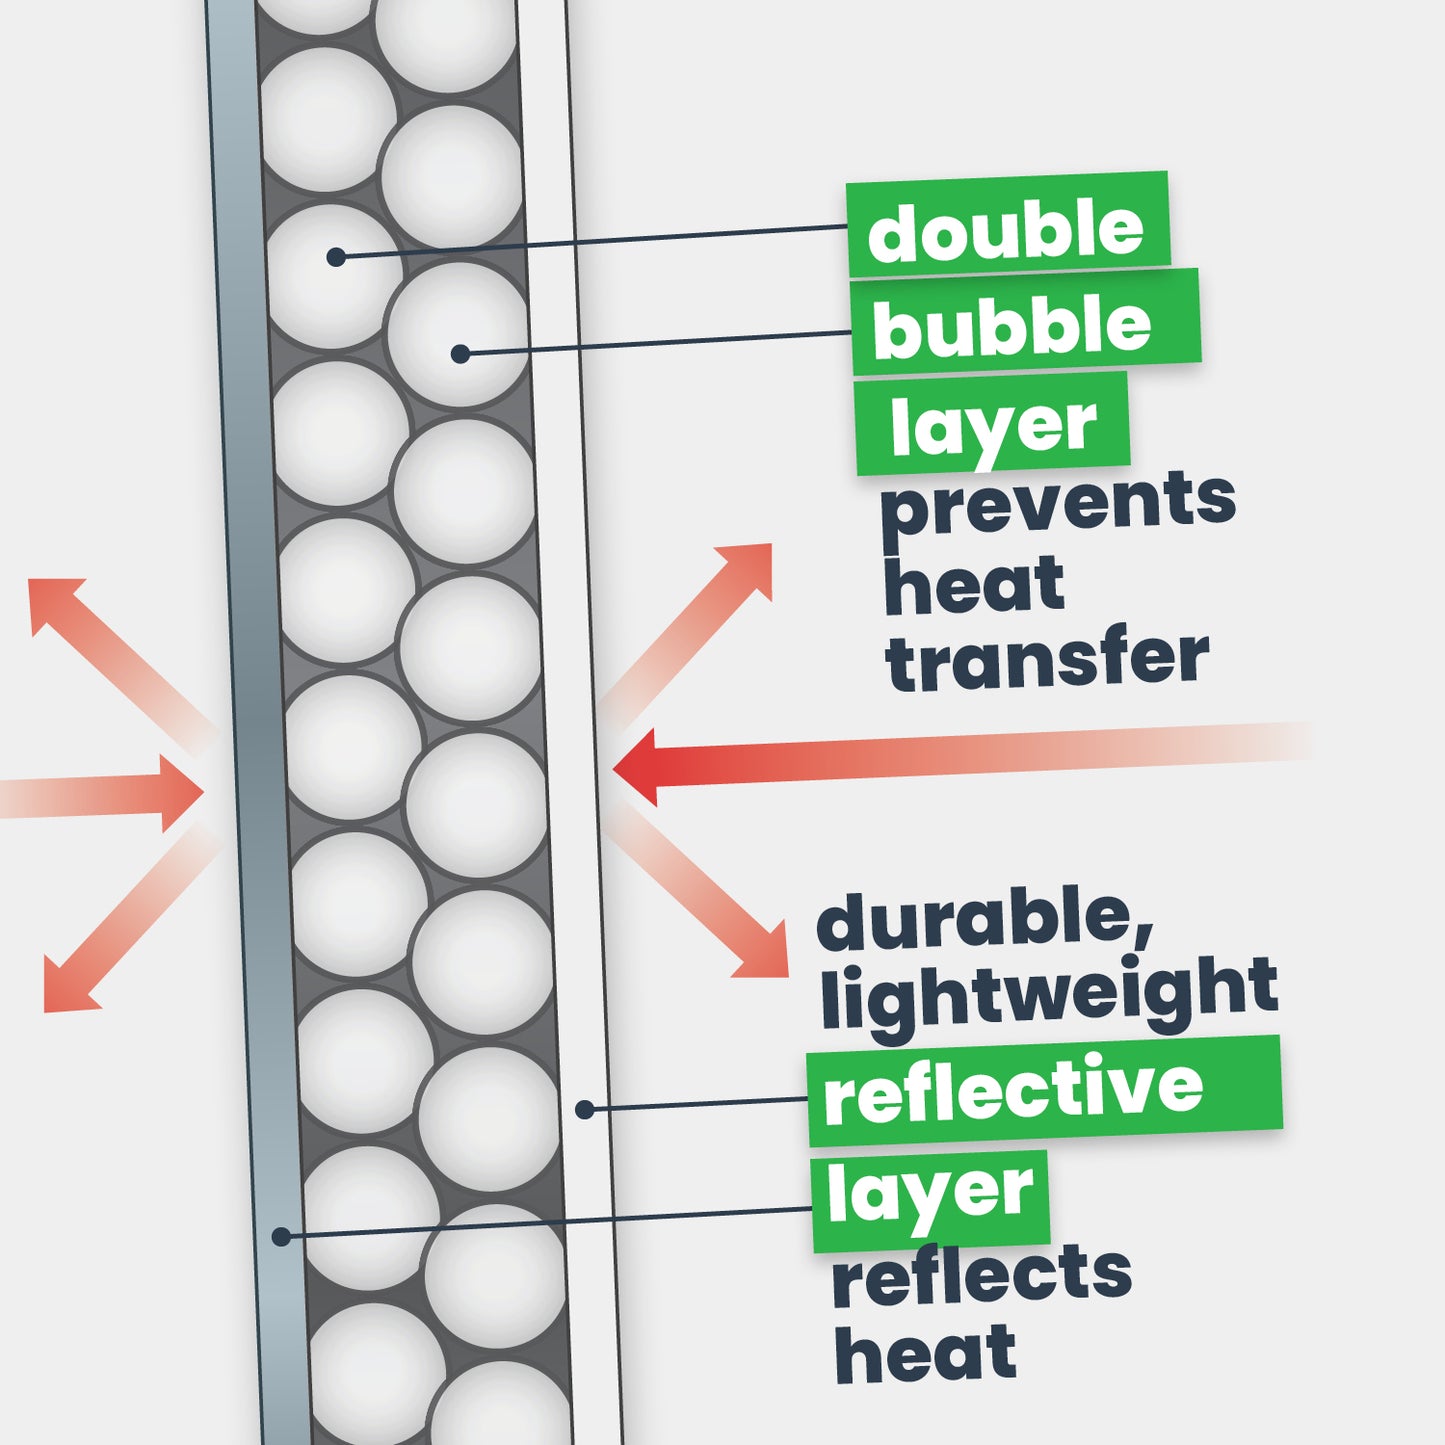 double bubble layer prevents heat transfer. durable, lightweight reflective layer reflects heat